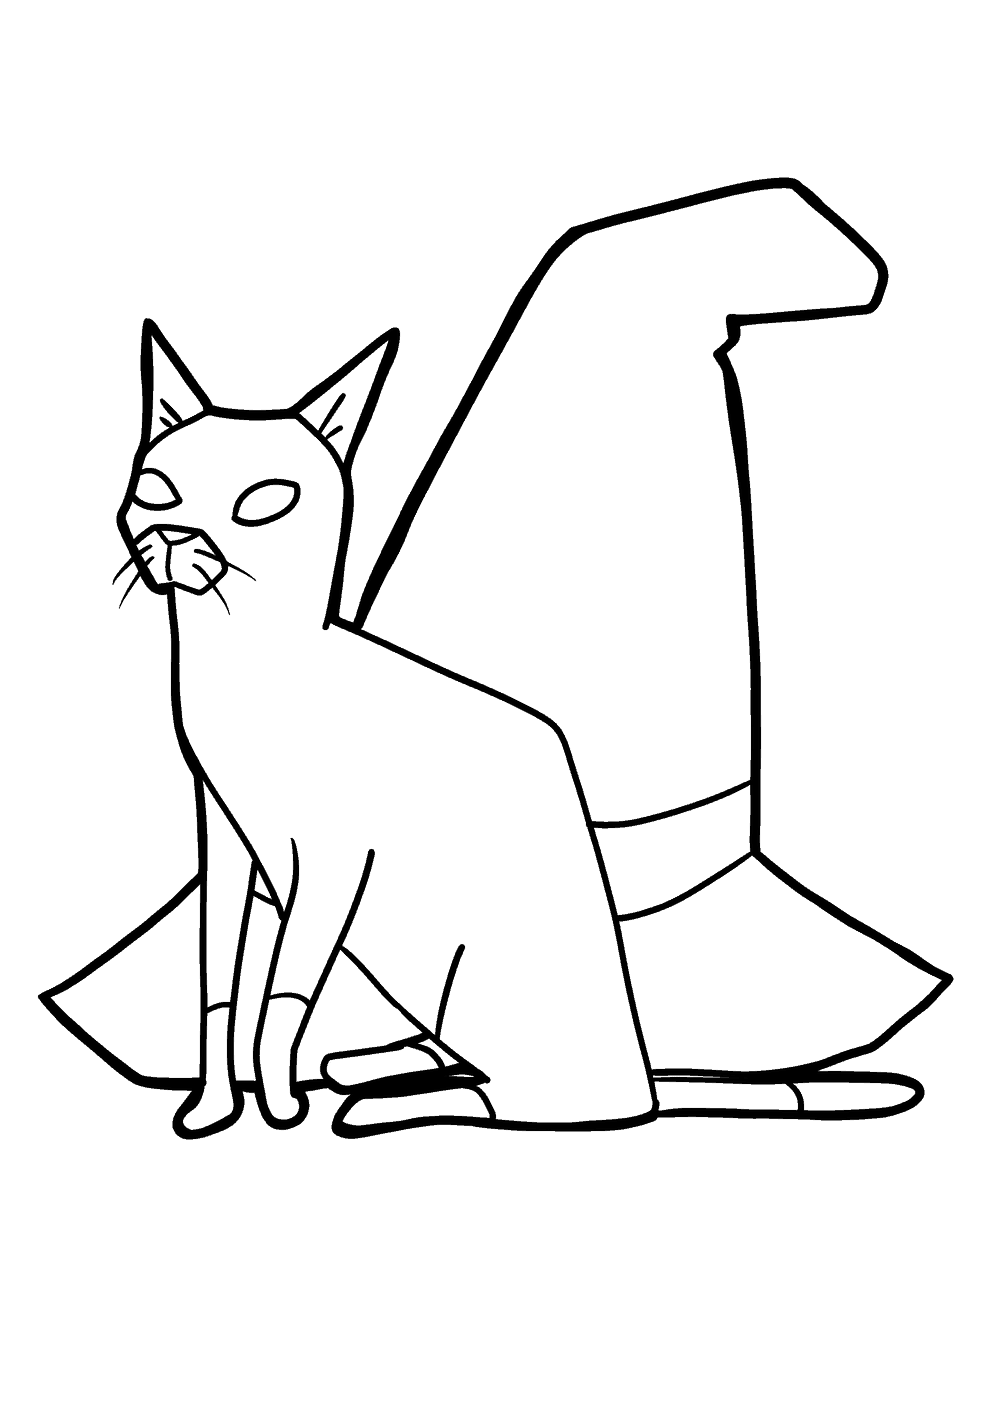 Halloween cat and hat coloring pages